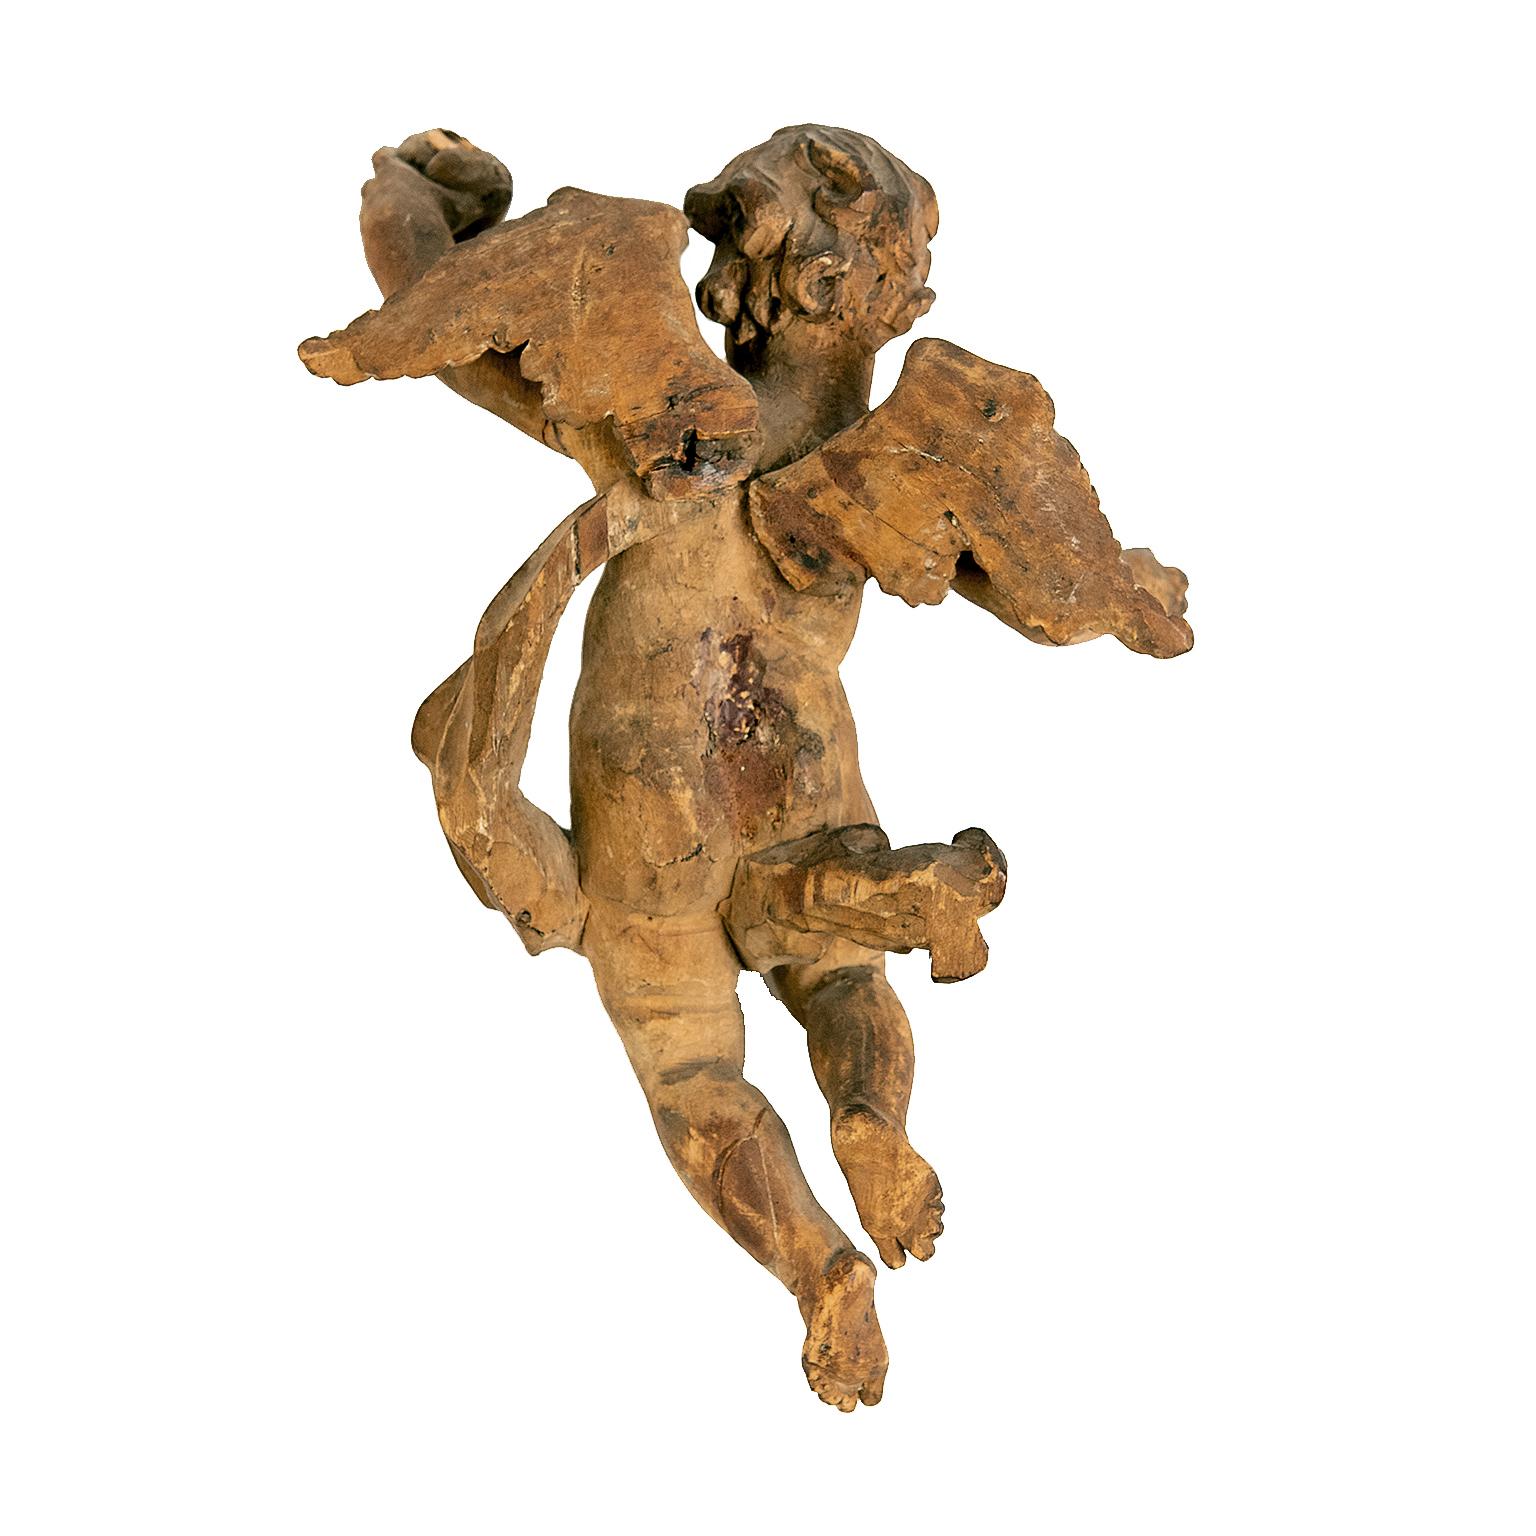 Hand-Carved Pair of Italian Carved Wood Figures of Putti, Cherub, Angels, Late 18th Century